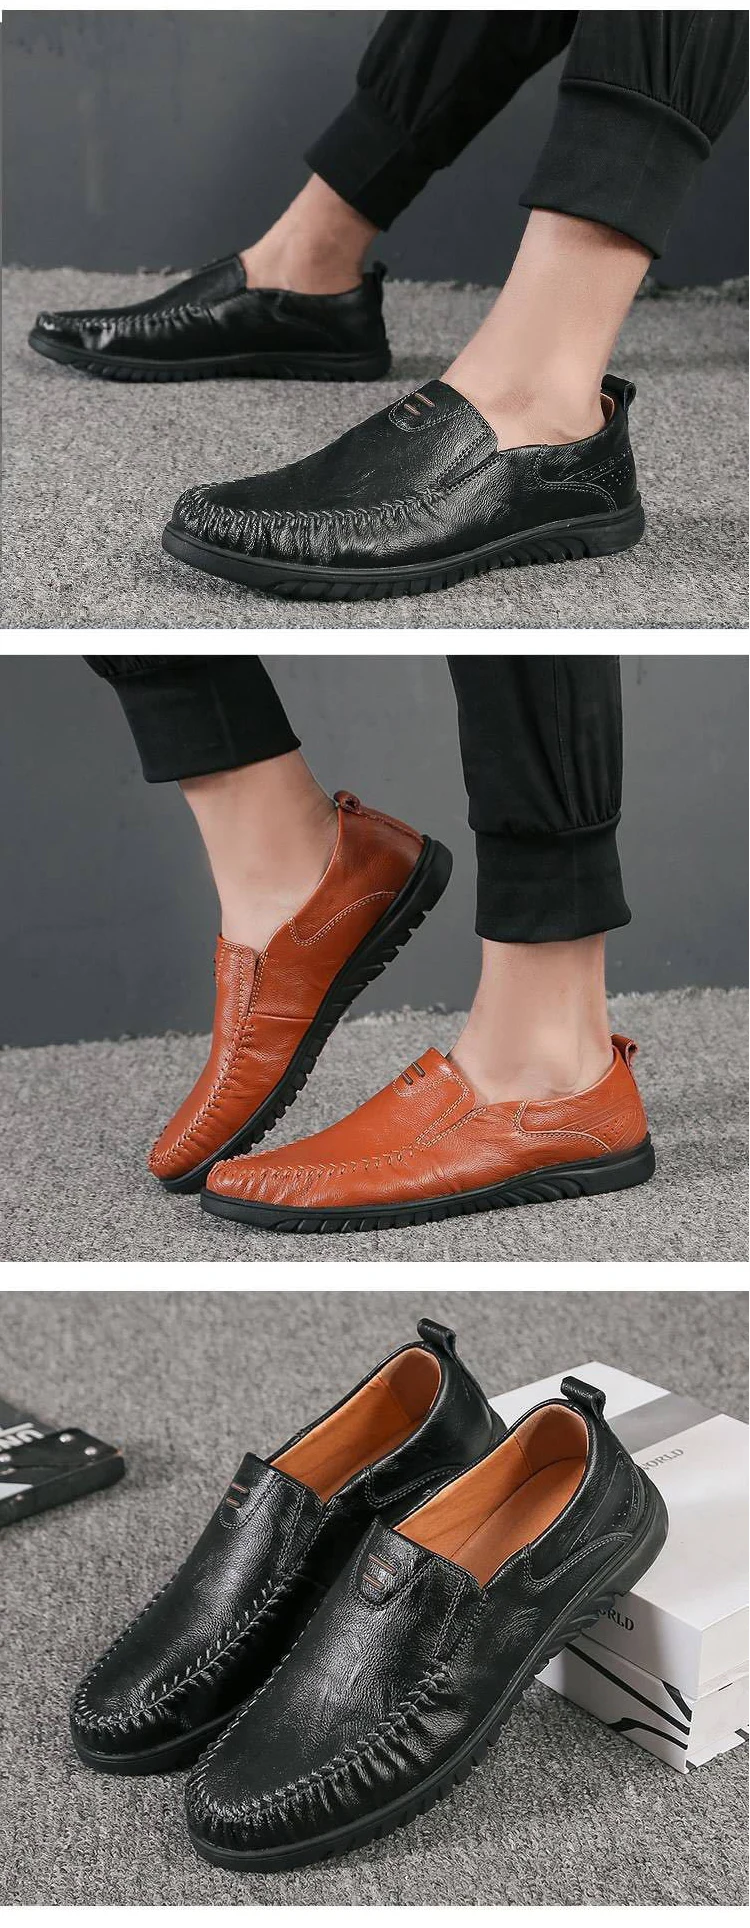 Driving Flat Comfortable Soft Shoes Office Business Casual Dress Loafer ...